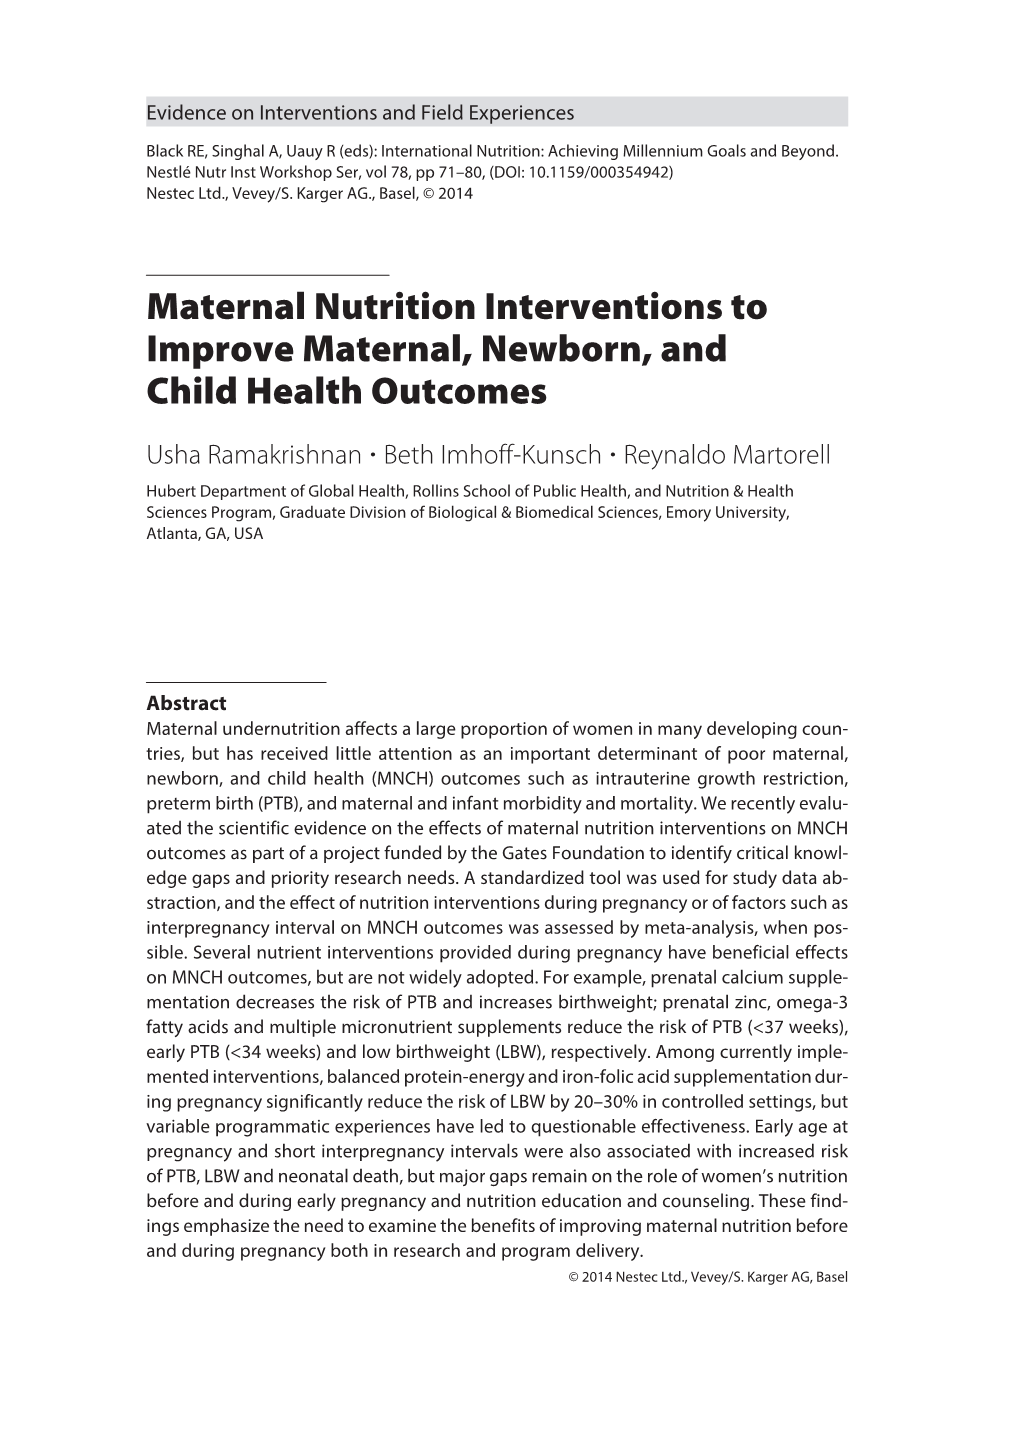 Maternal Nutrition Interventions to Improve Maternal, Newborn, and Child Health Outcomes